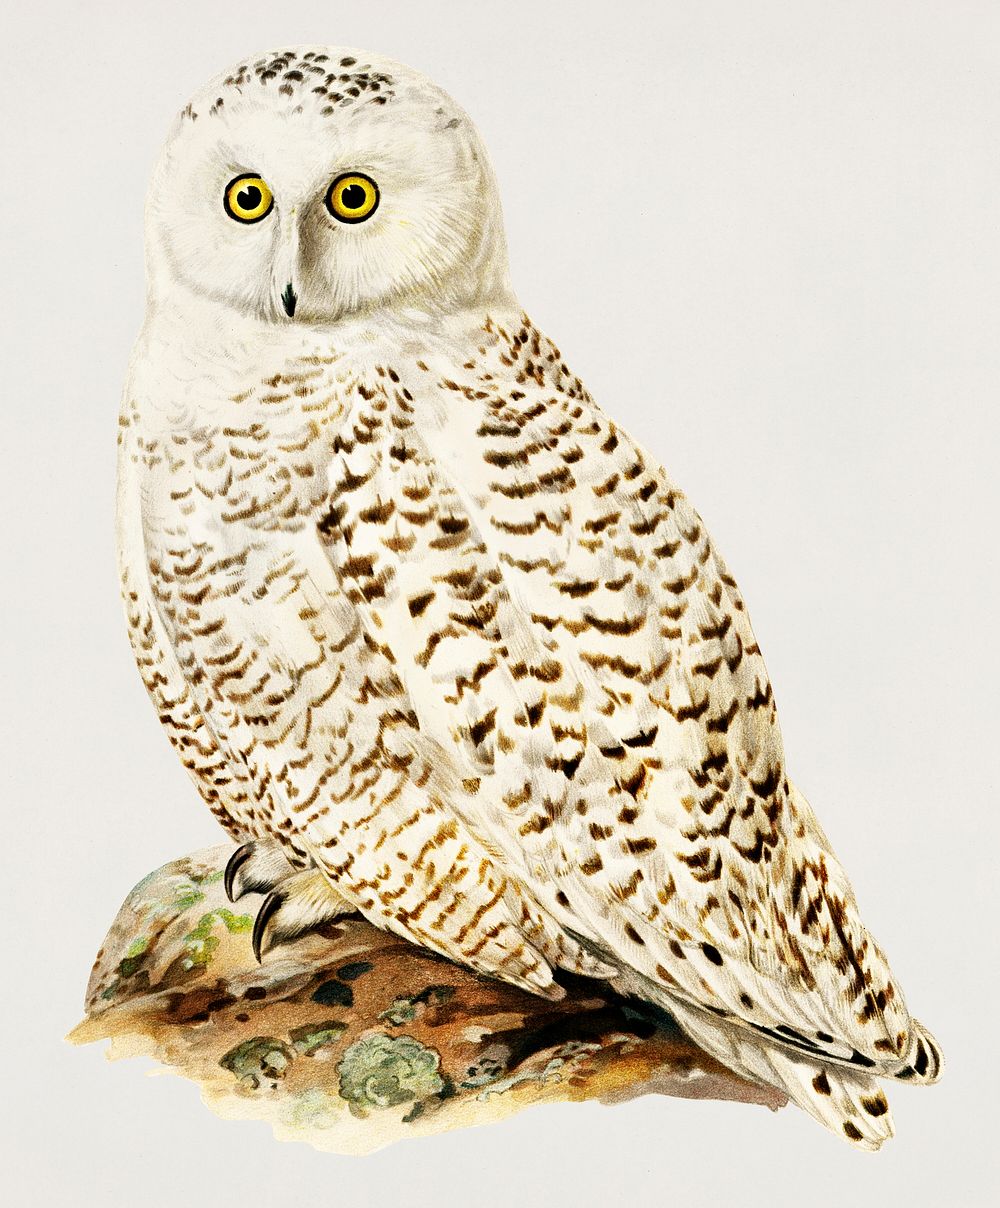 Snowy owl (Nyctea Scandiaca) illustrated by the von Wright brothers. Digitally enhanced from our own 1929 folio version of…